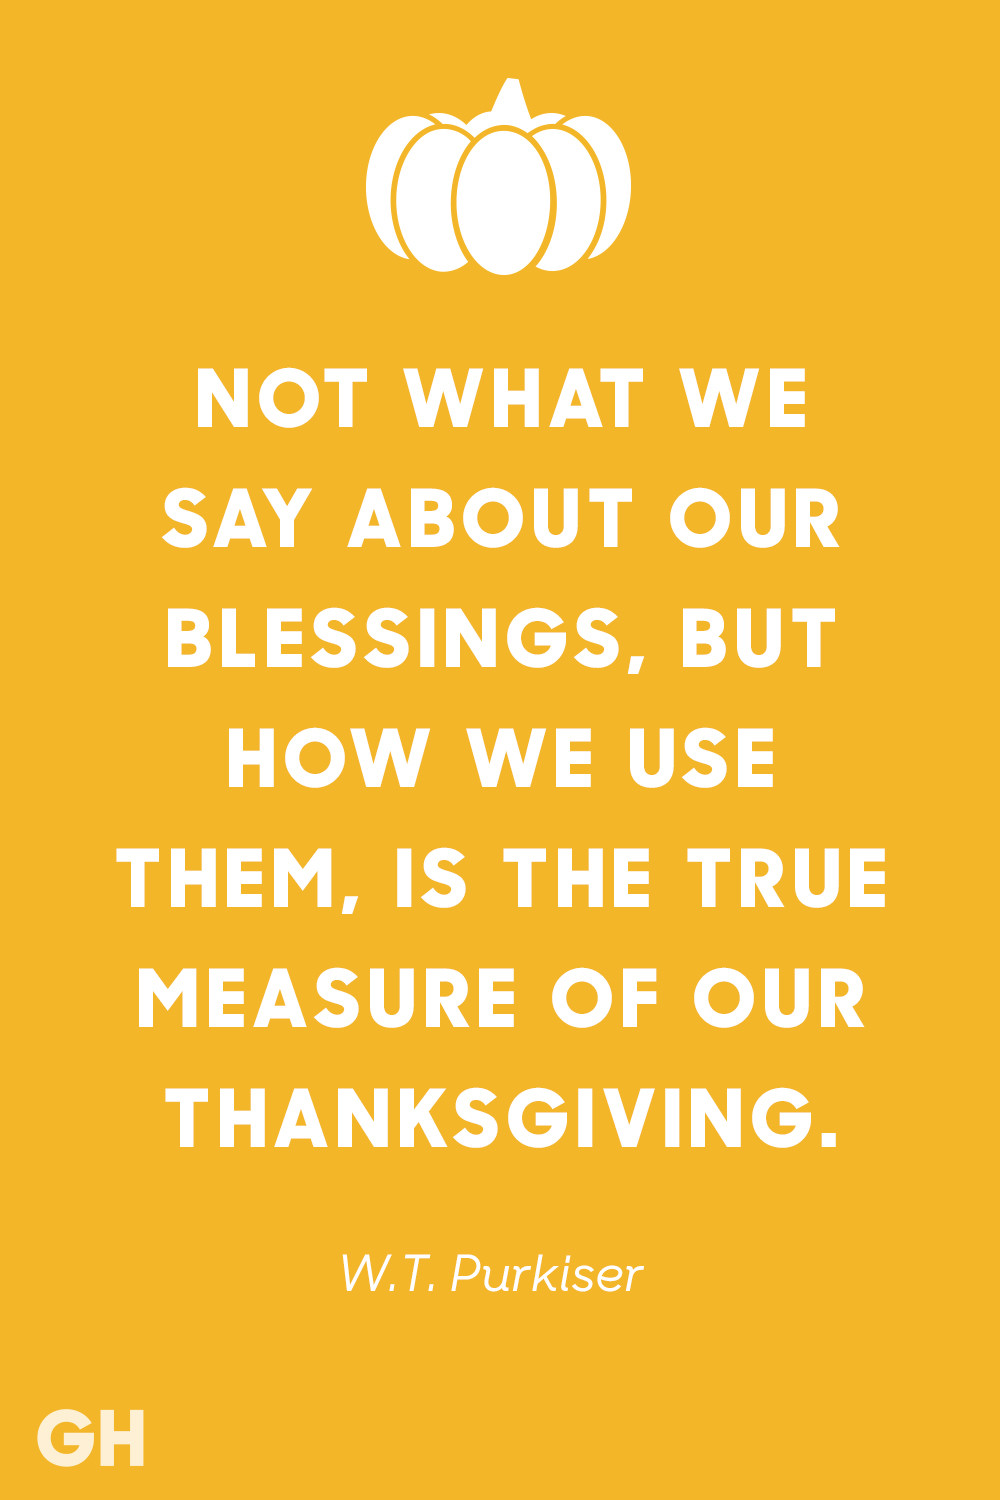 Thanksgiving Day Quotes
 15 Best Thanksgiving Quotes Inspirational and Funny